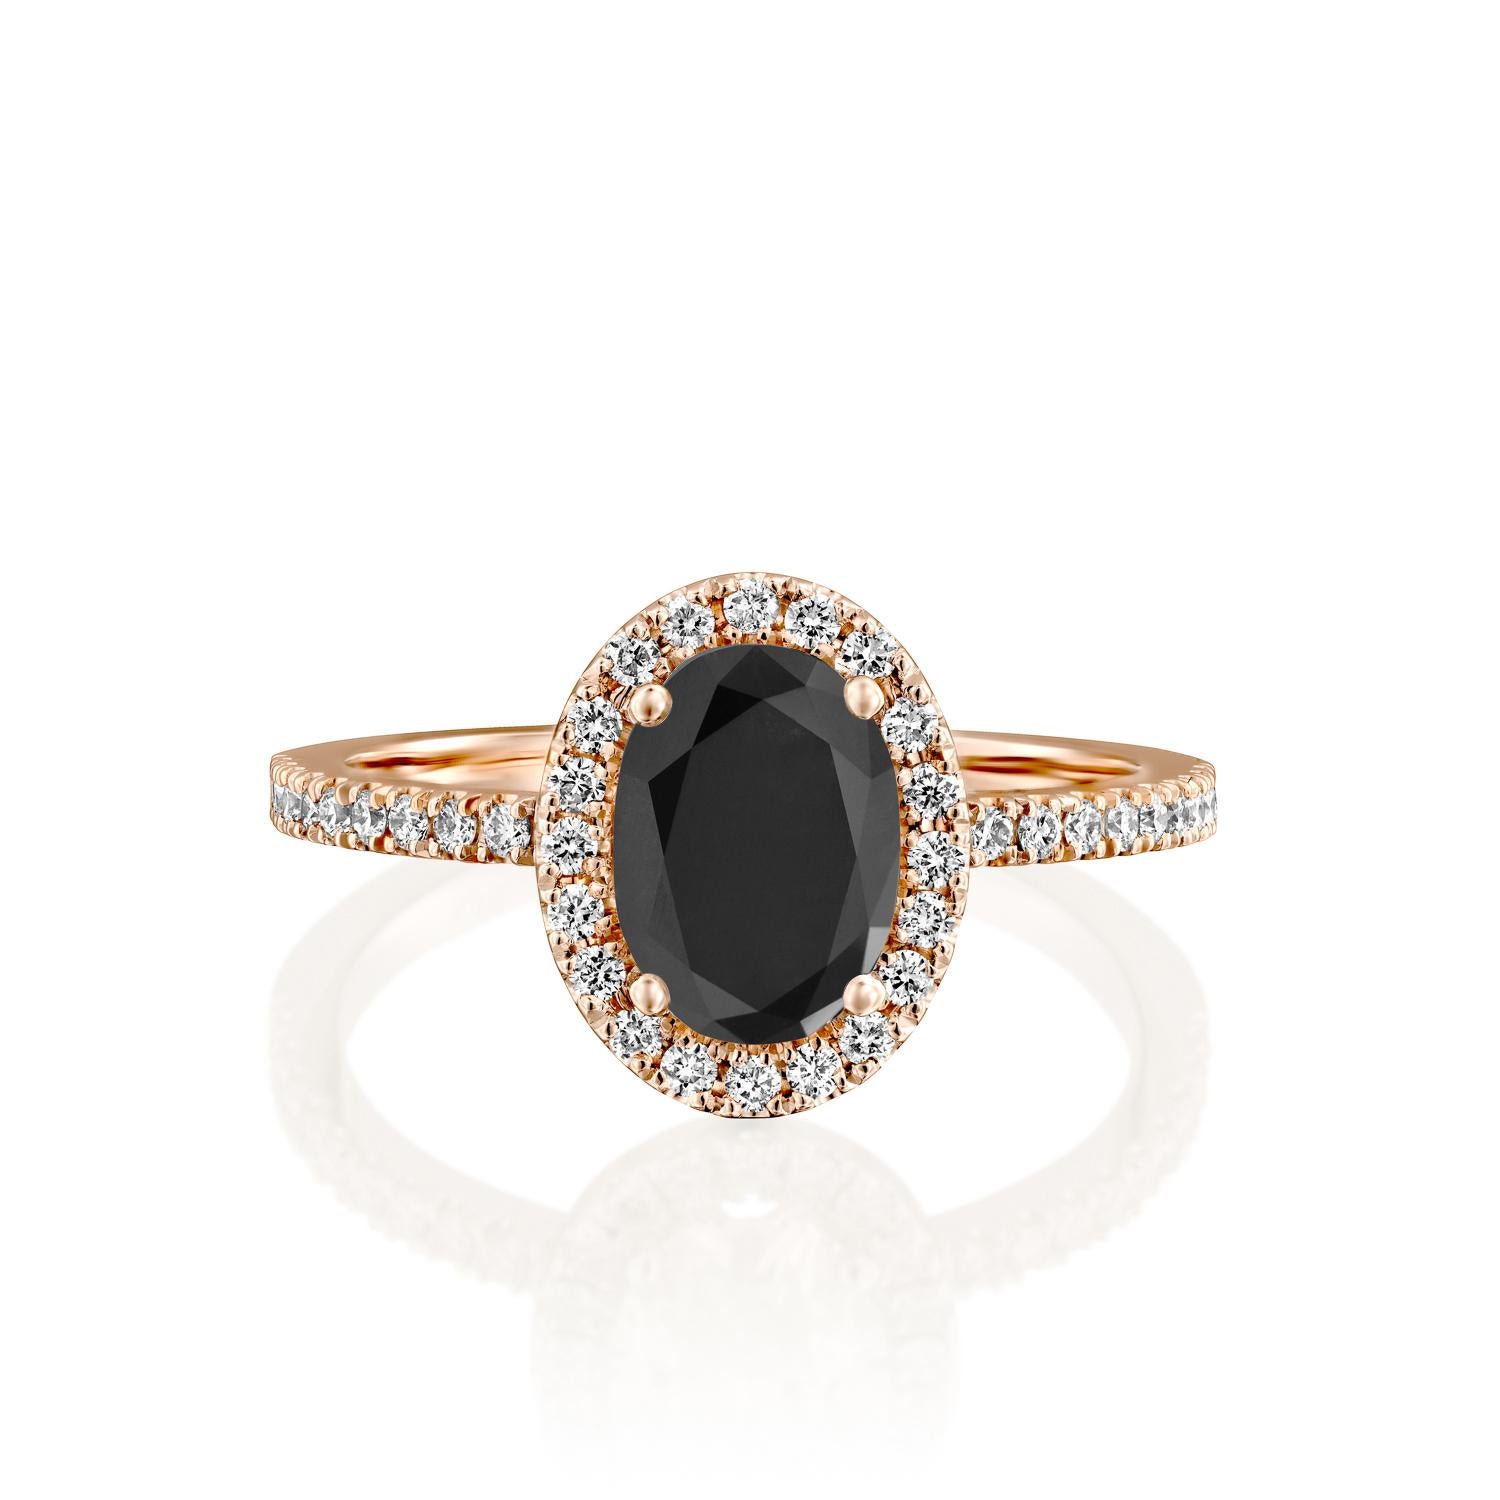 Beautiful solitaire with accents vintage style diamond engagement ring. Center stone is natural, oval shaped, AAA quality Black Diamond of 1.5 carat and it is surrounded by smaller natural diamonds approx. 0.5 total carat weight. The total carat